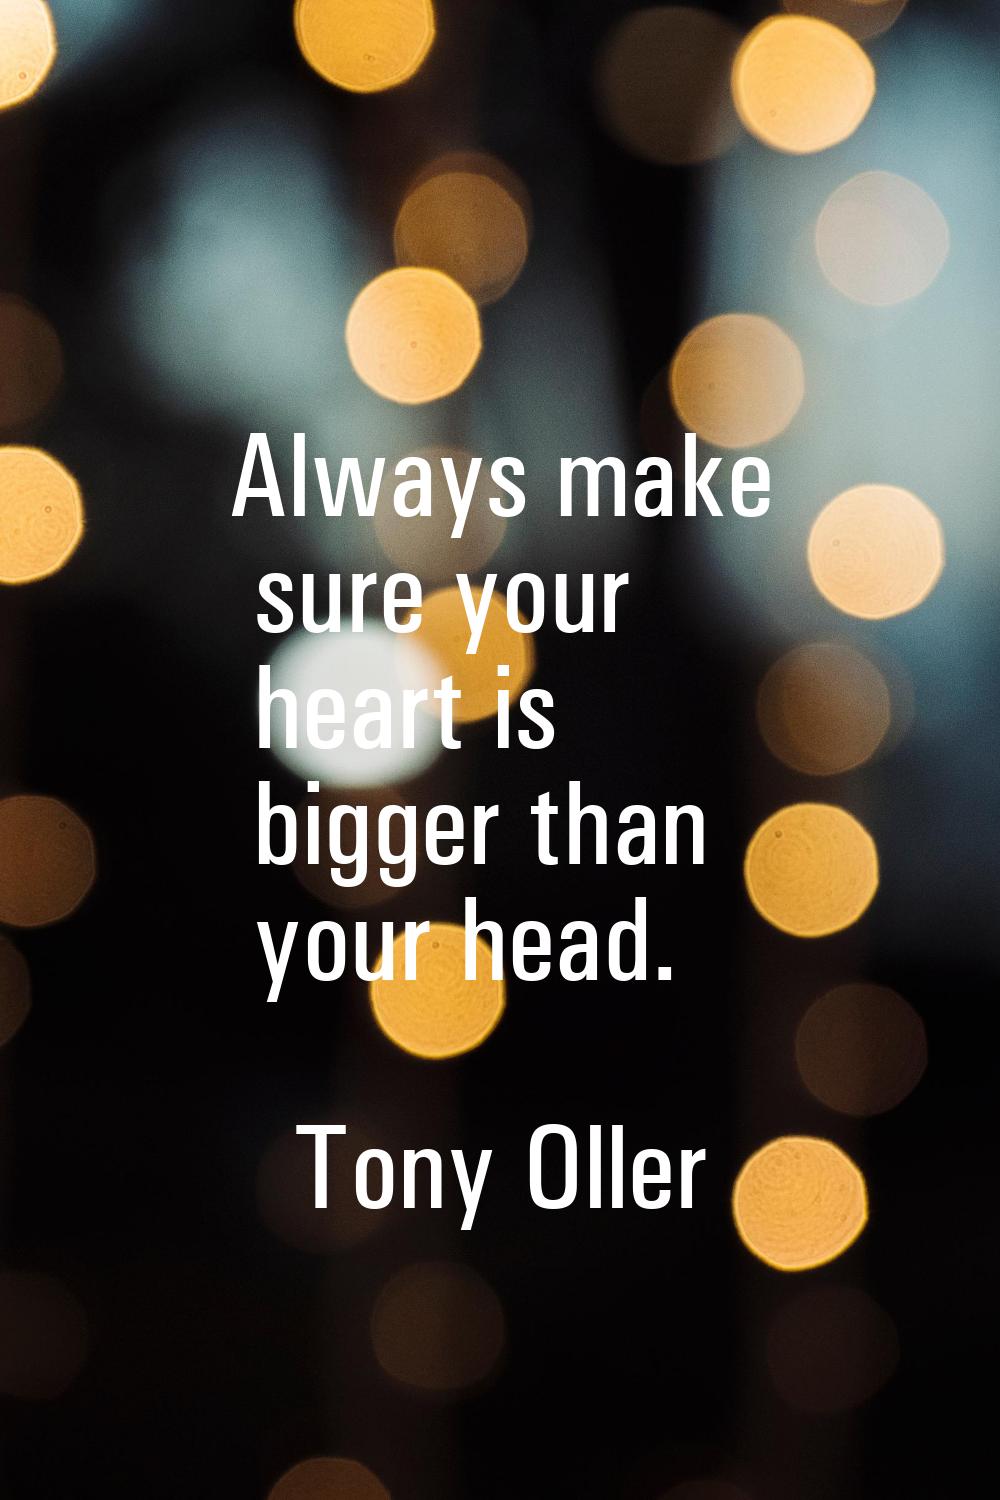 Always make sure your heart is bigger than your head.